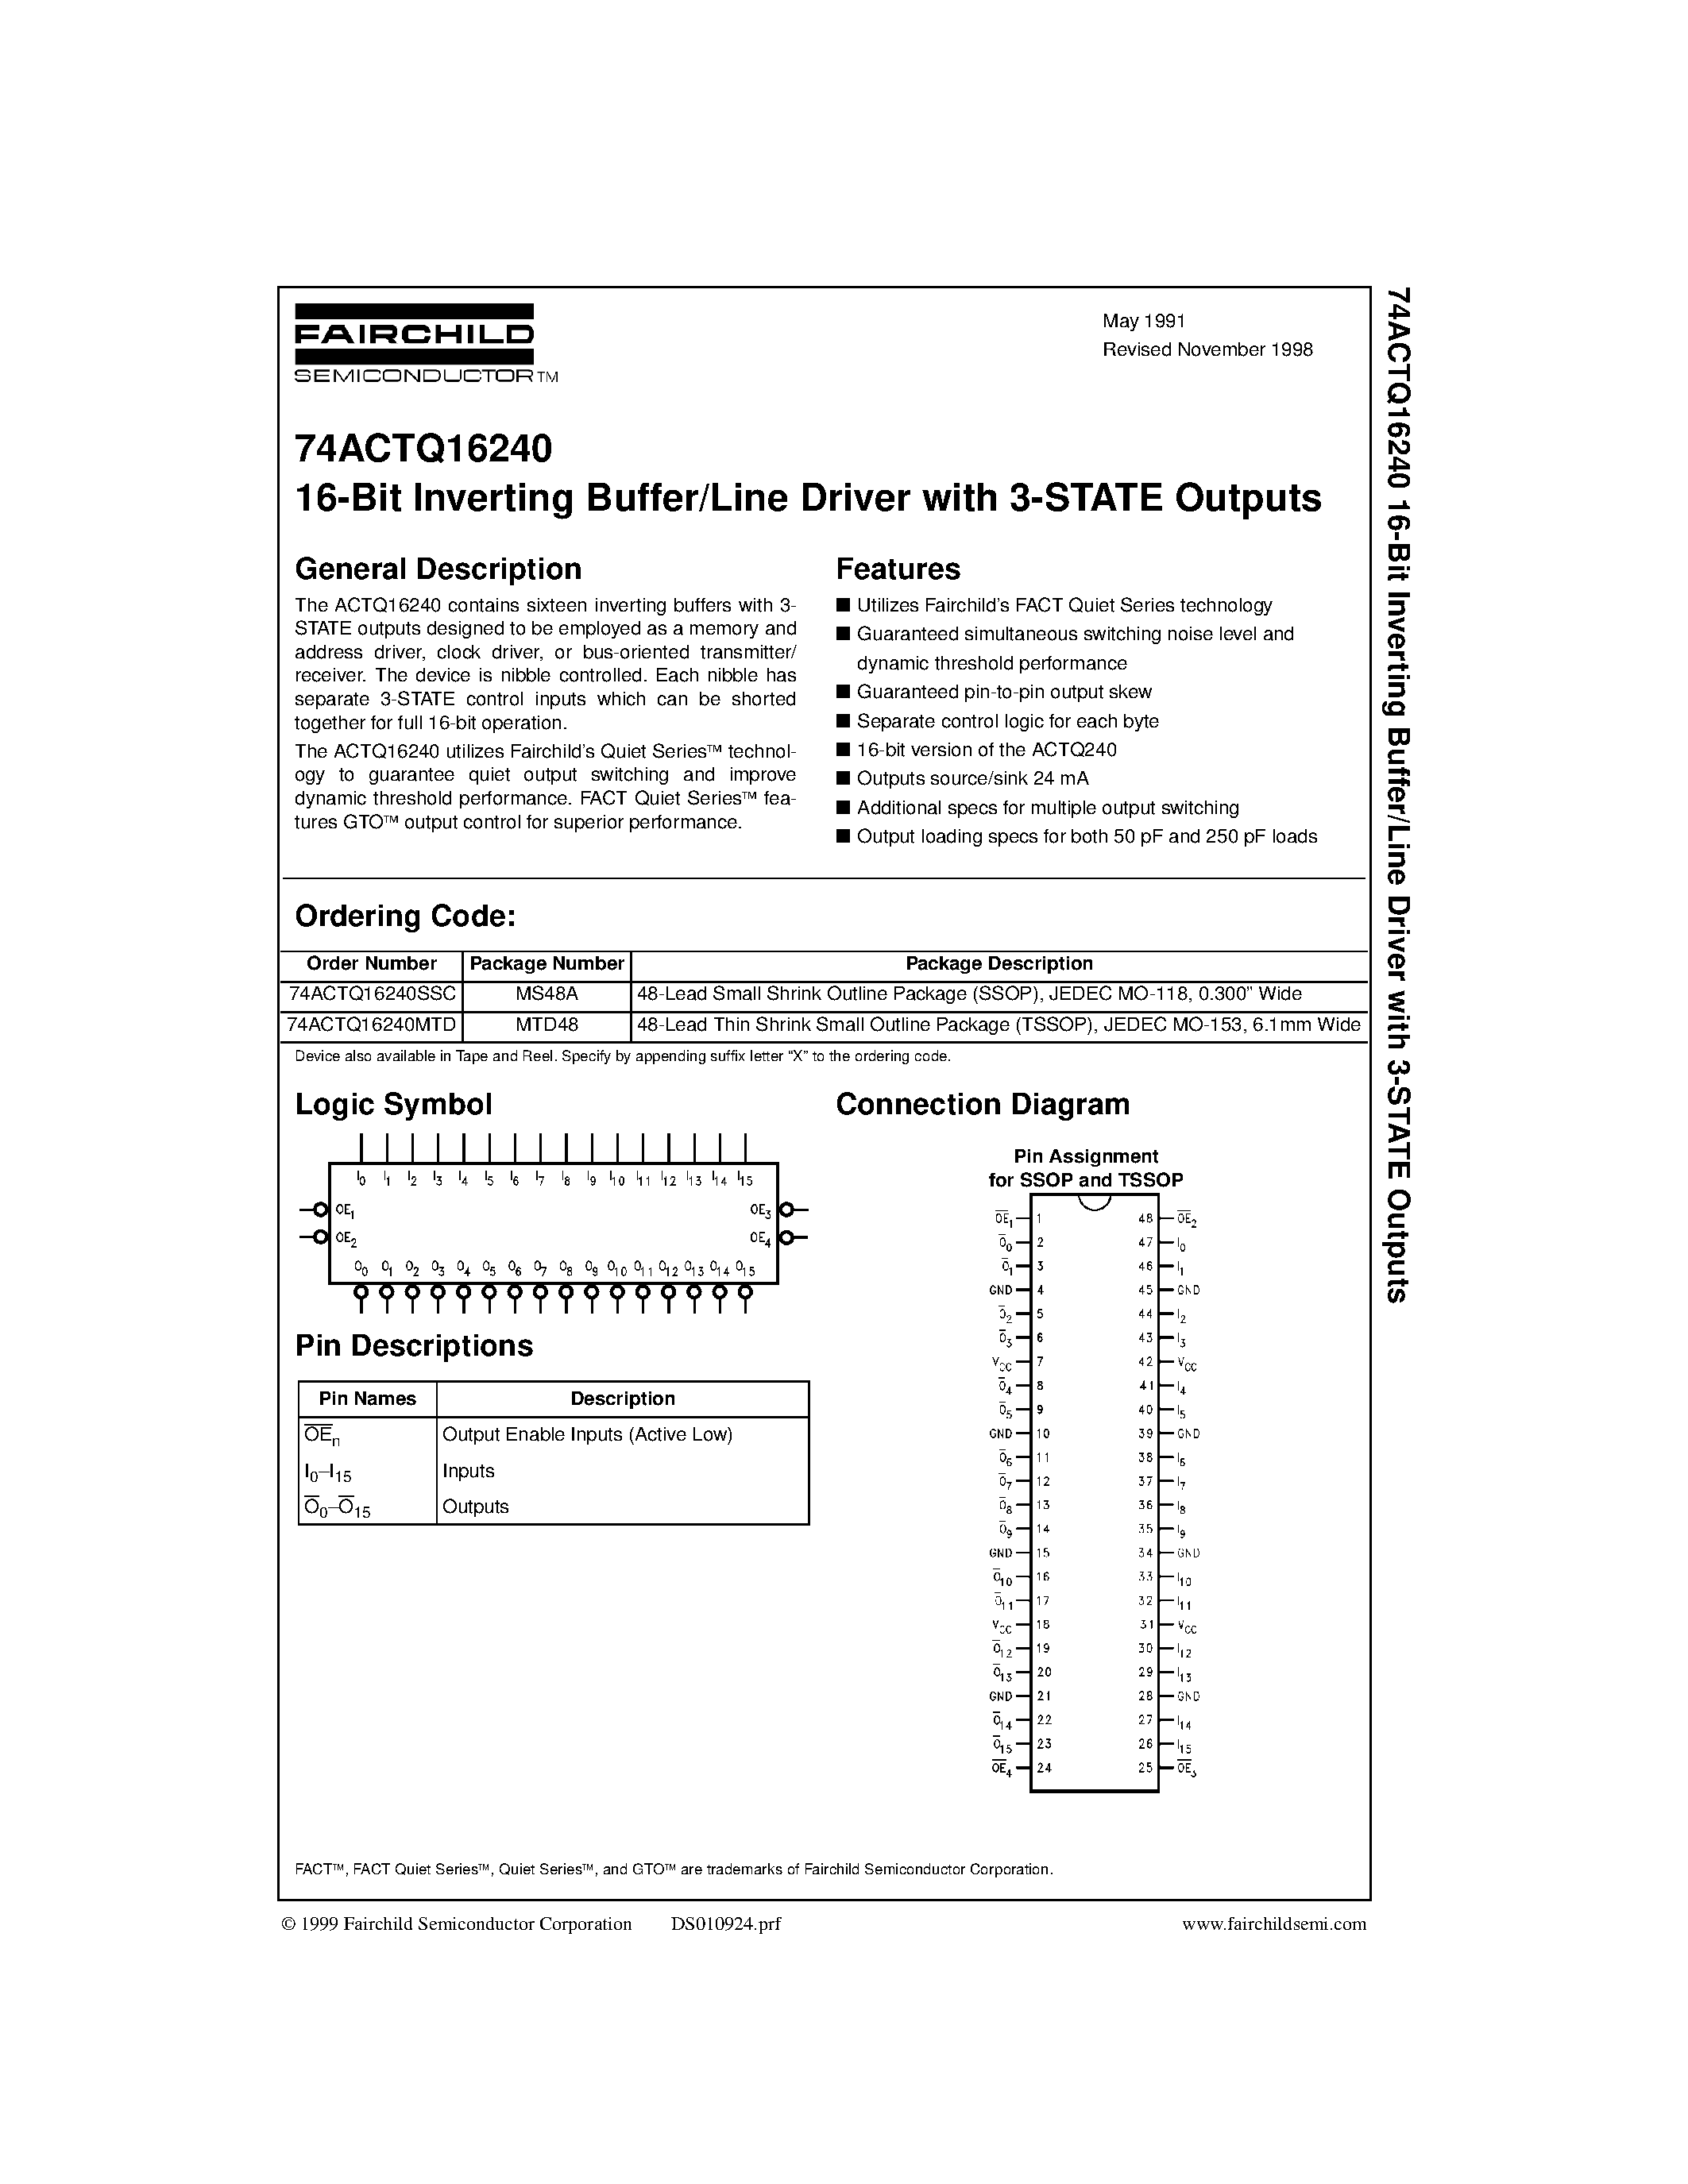 Datasheet 74ACTQ16240MTD - 16-Bit Inverting Buffer/Line Driver with 3-STATE Outputs page 1